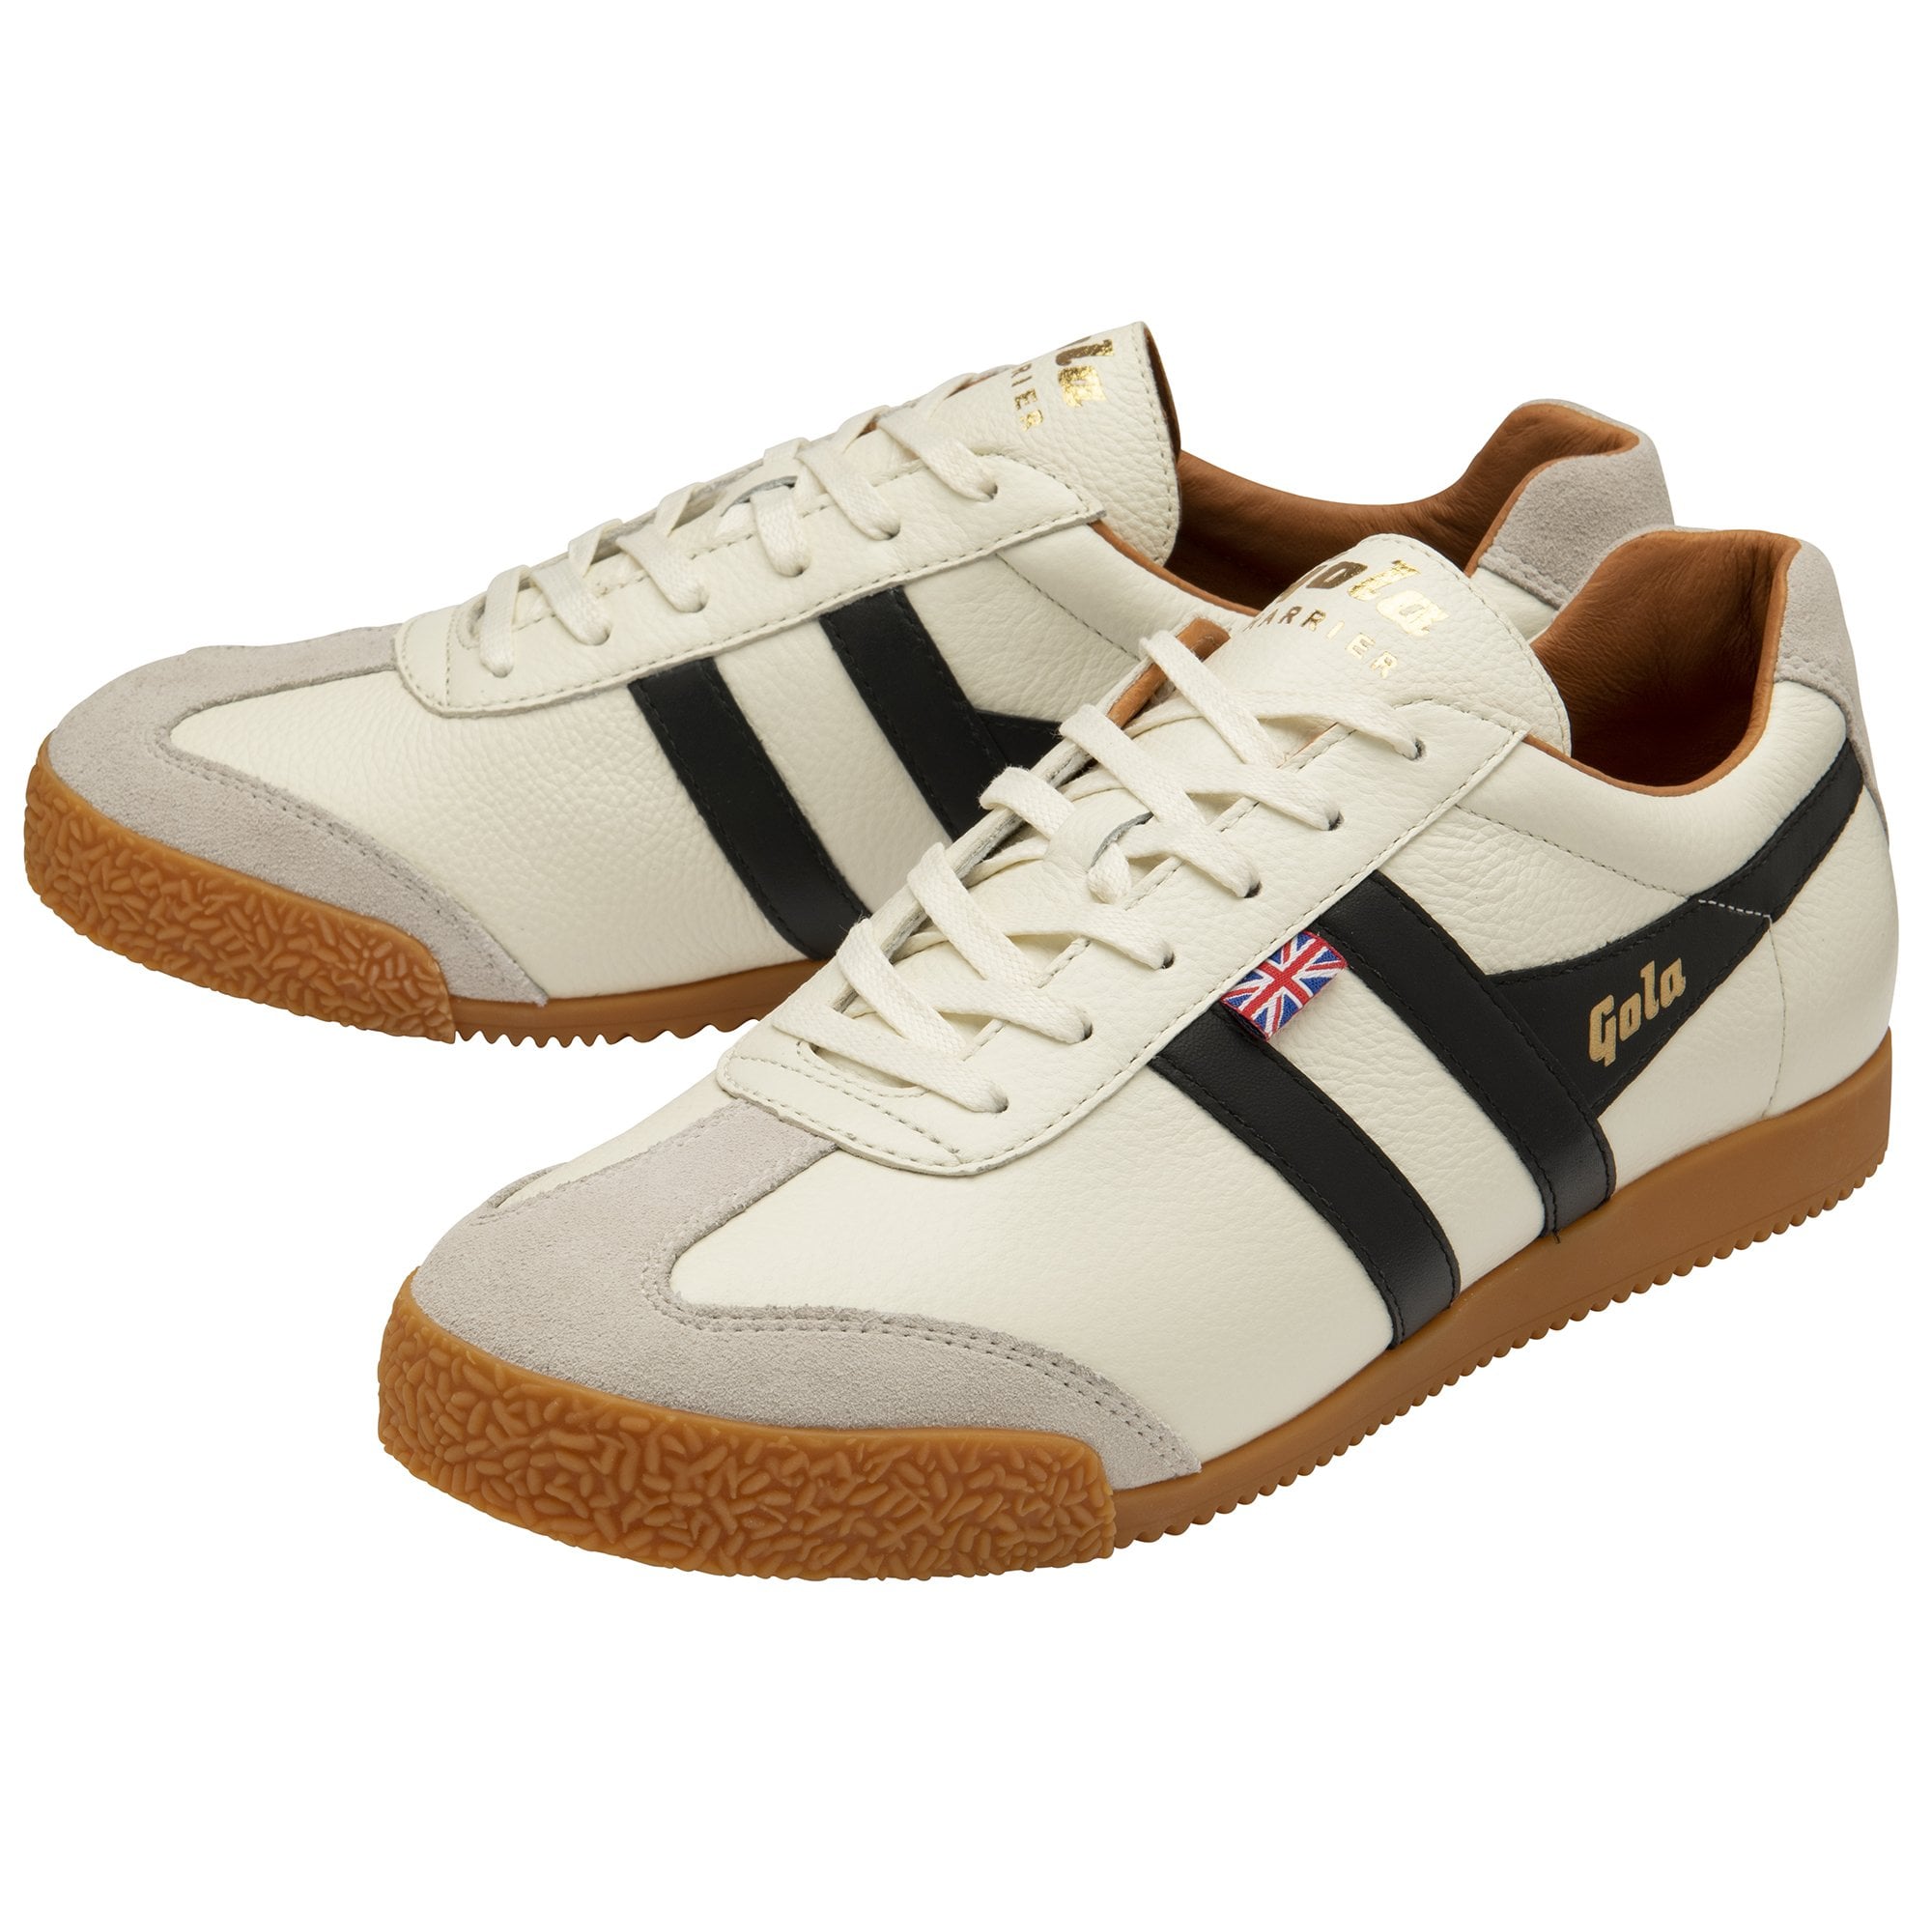 GOLA HARRIER ELITE TRAINERS - Made in England - Off White/Black